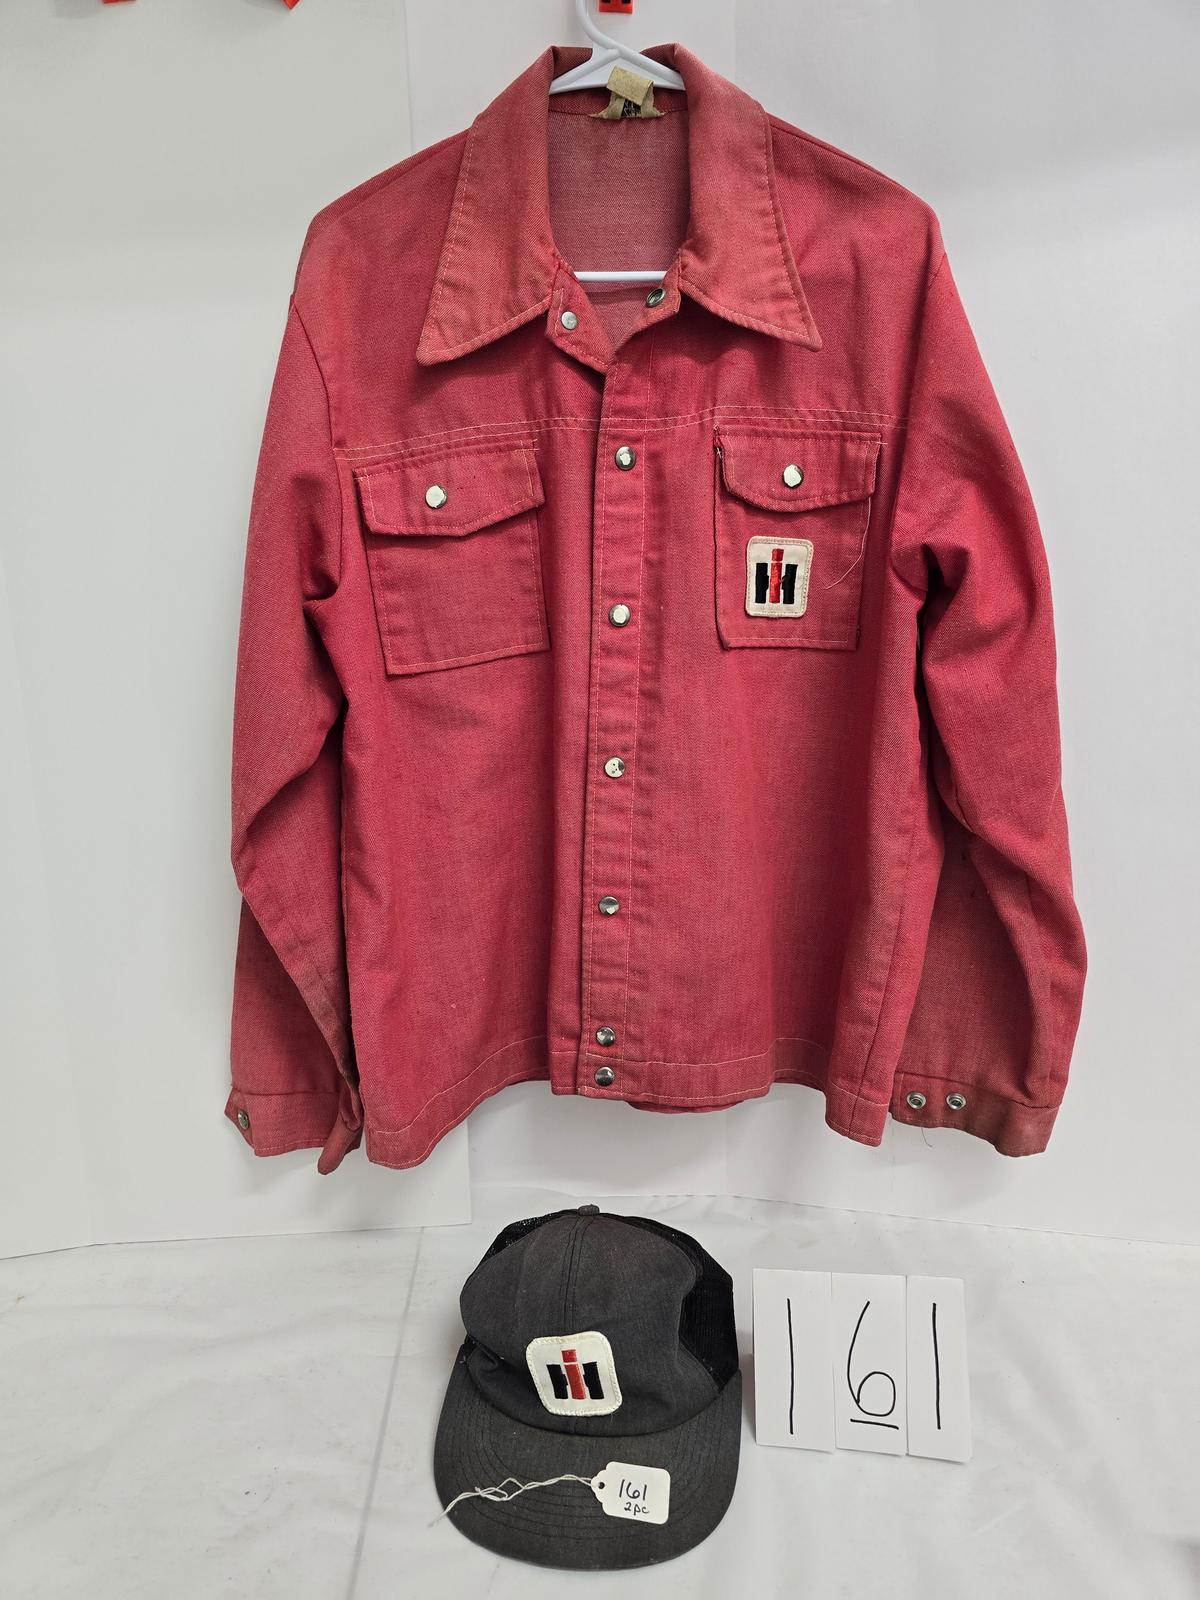 Swingster western used jacket large IH with IH summer hat